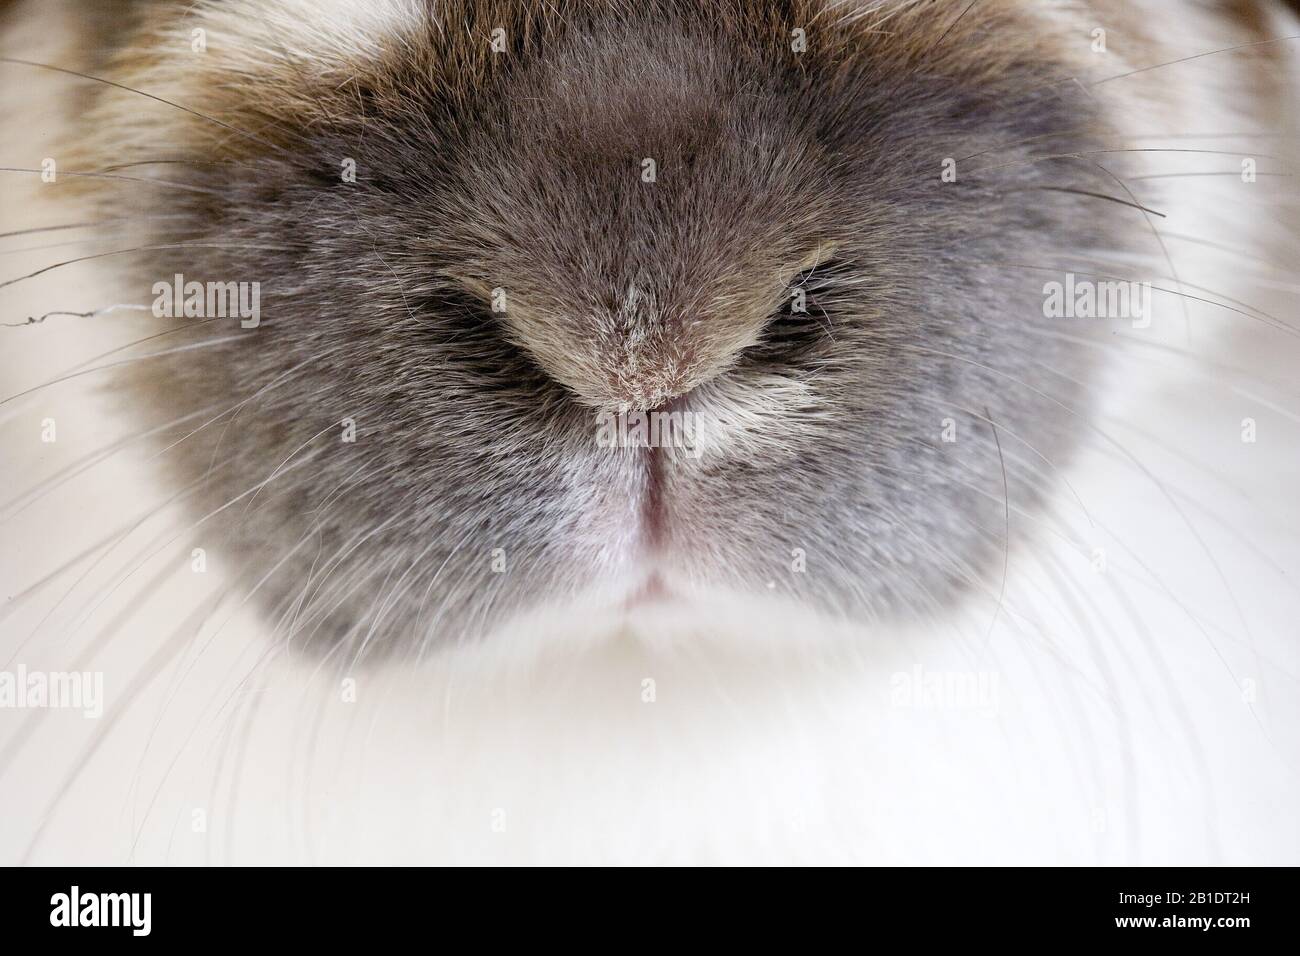 Lop-Eared Domestic Rabbit, Close-Up of Nose Stock Photo